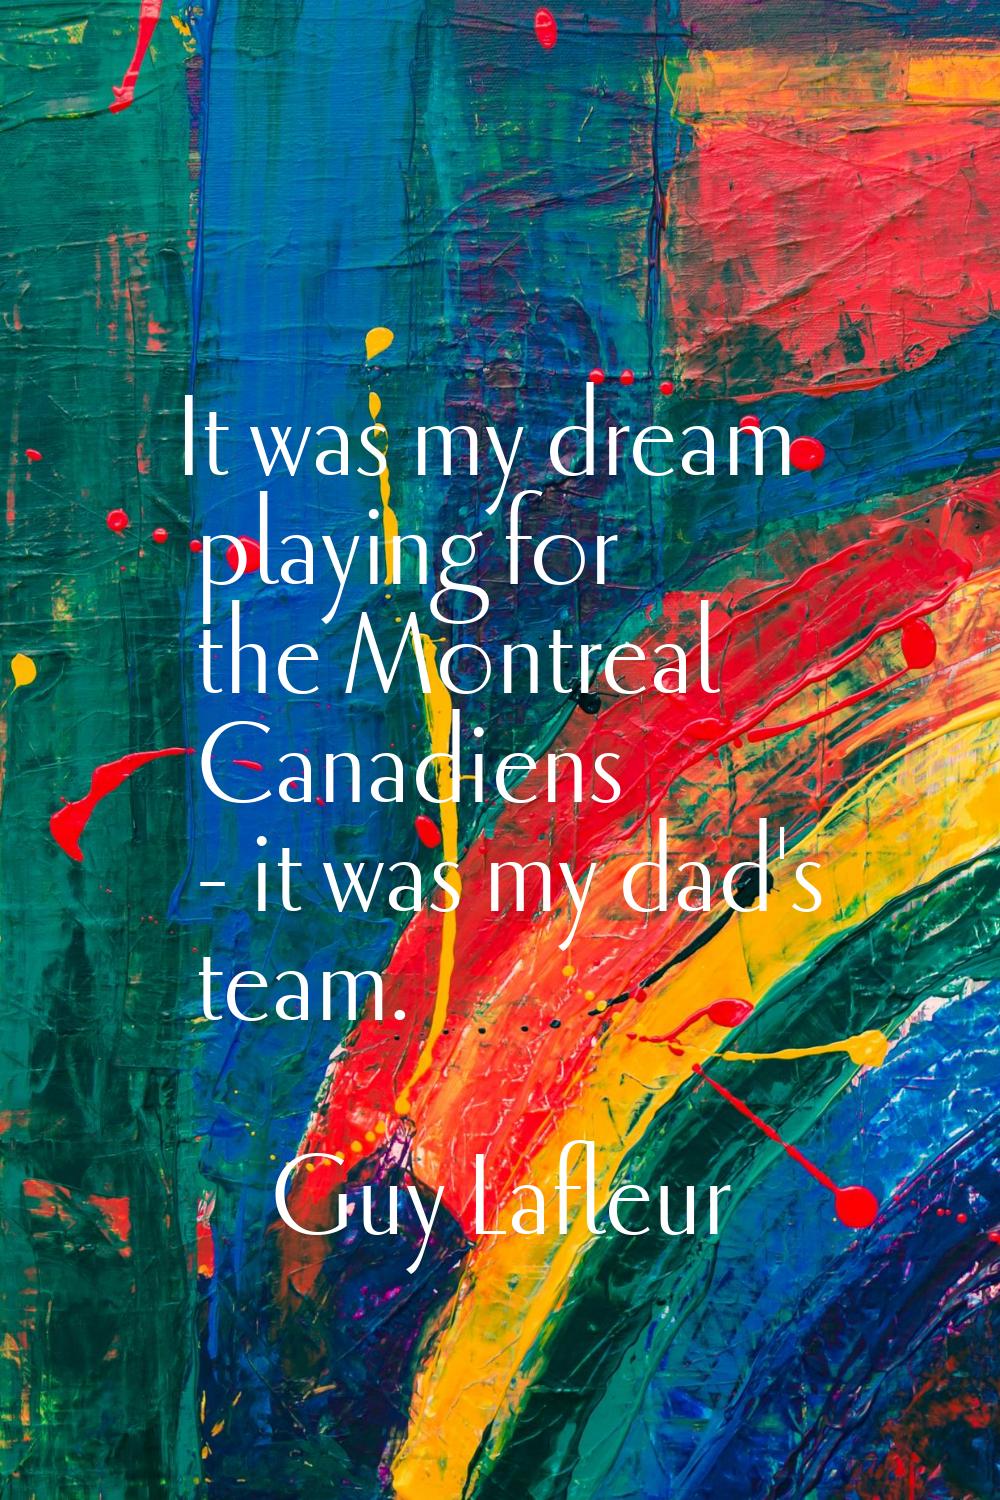 It was my dream playing for the Montreal Canadiens - it was my dad's team.